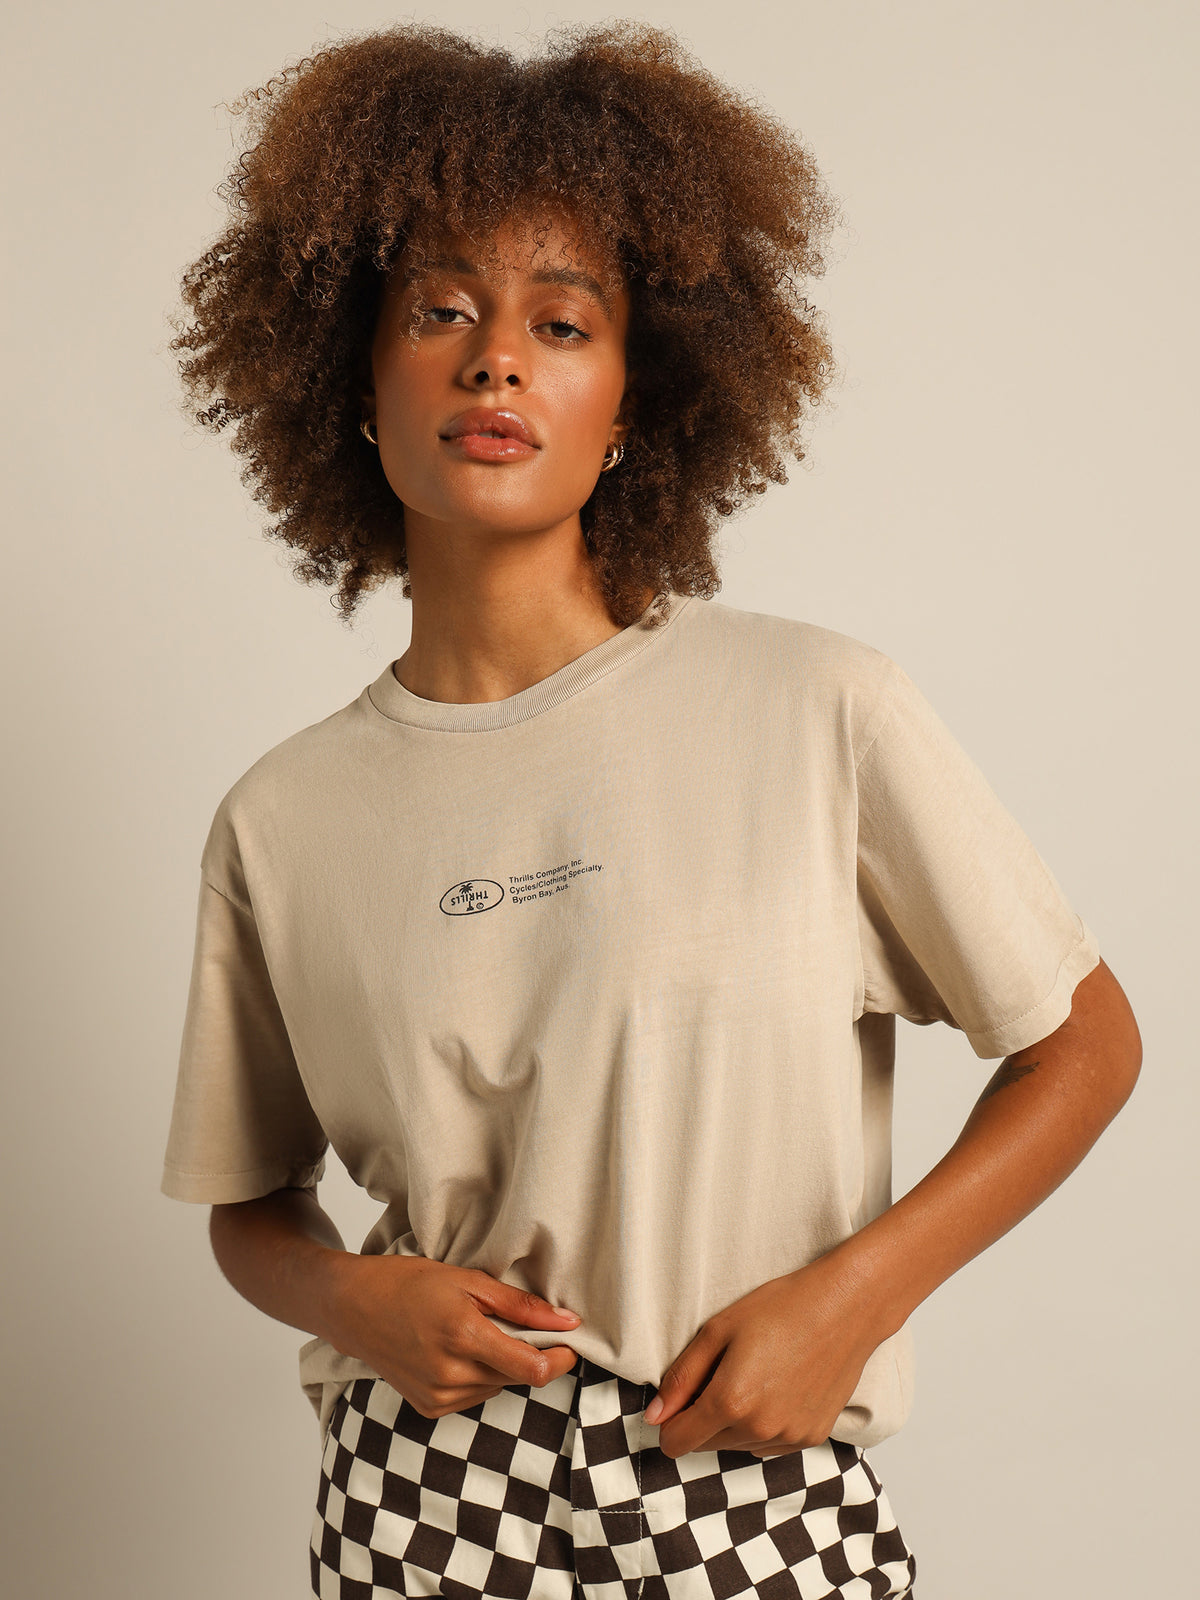 Alignment Merch Fit T-Shirt in Aged Tan